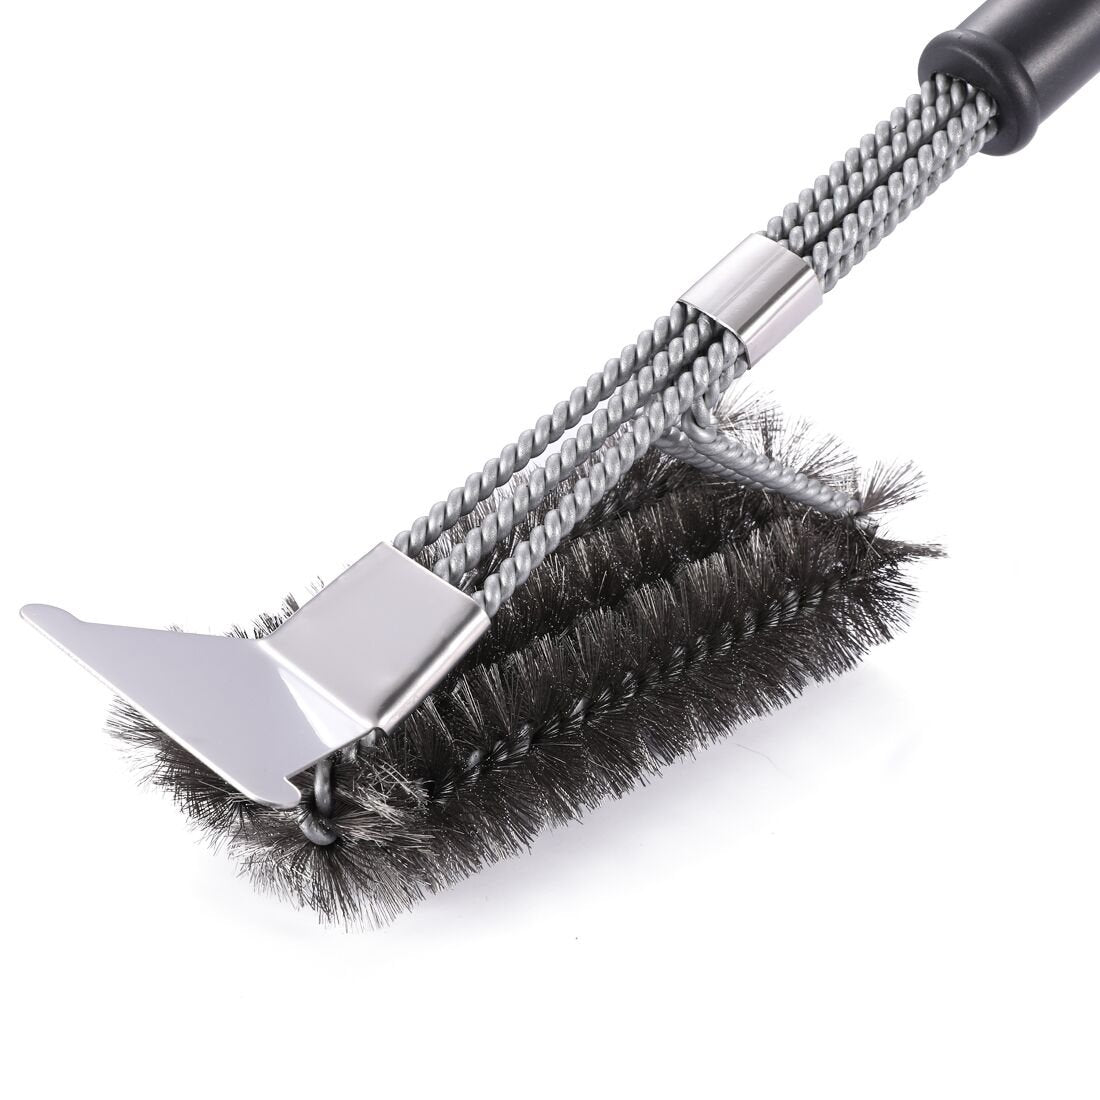 Barbecue Stainless Steel Bbq Cleaning Brush